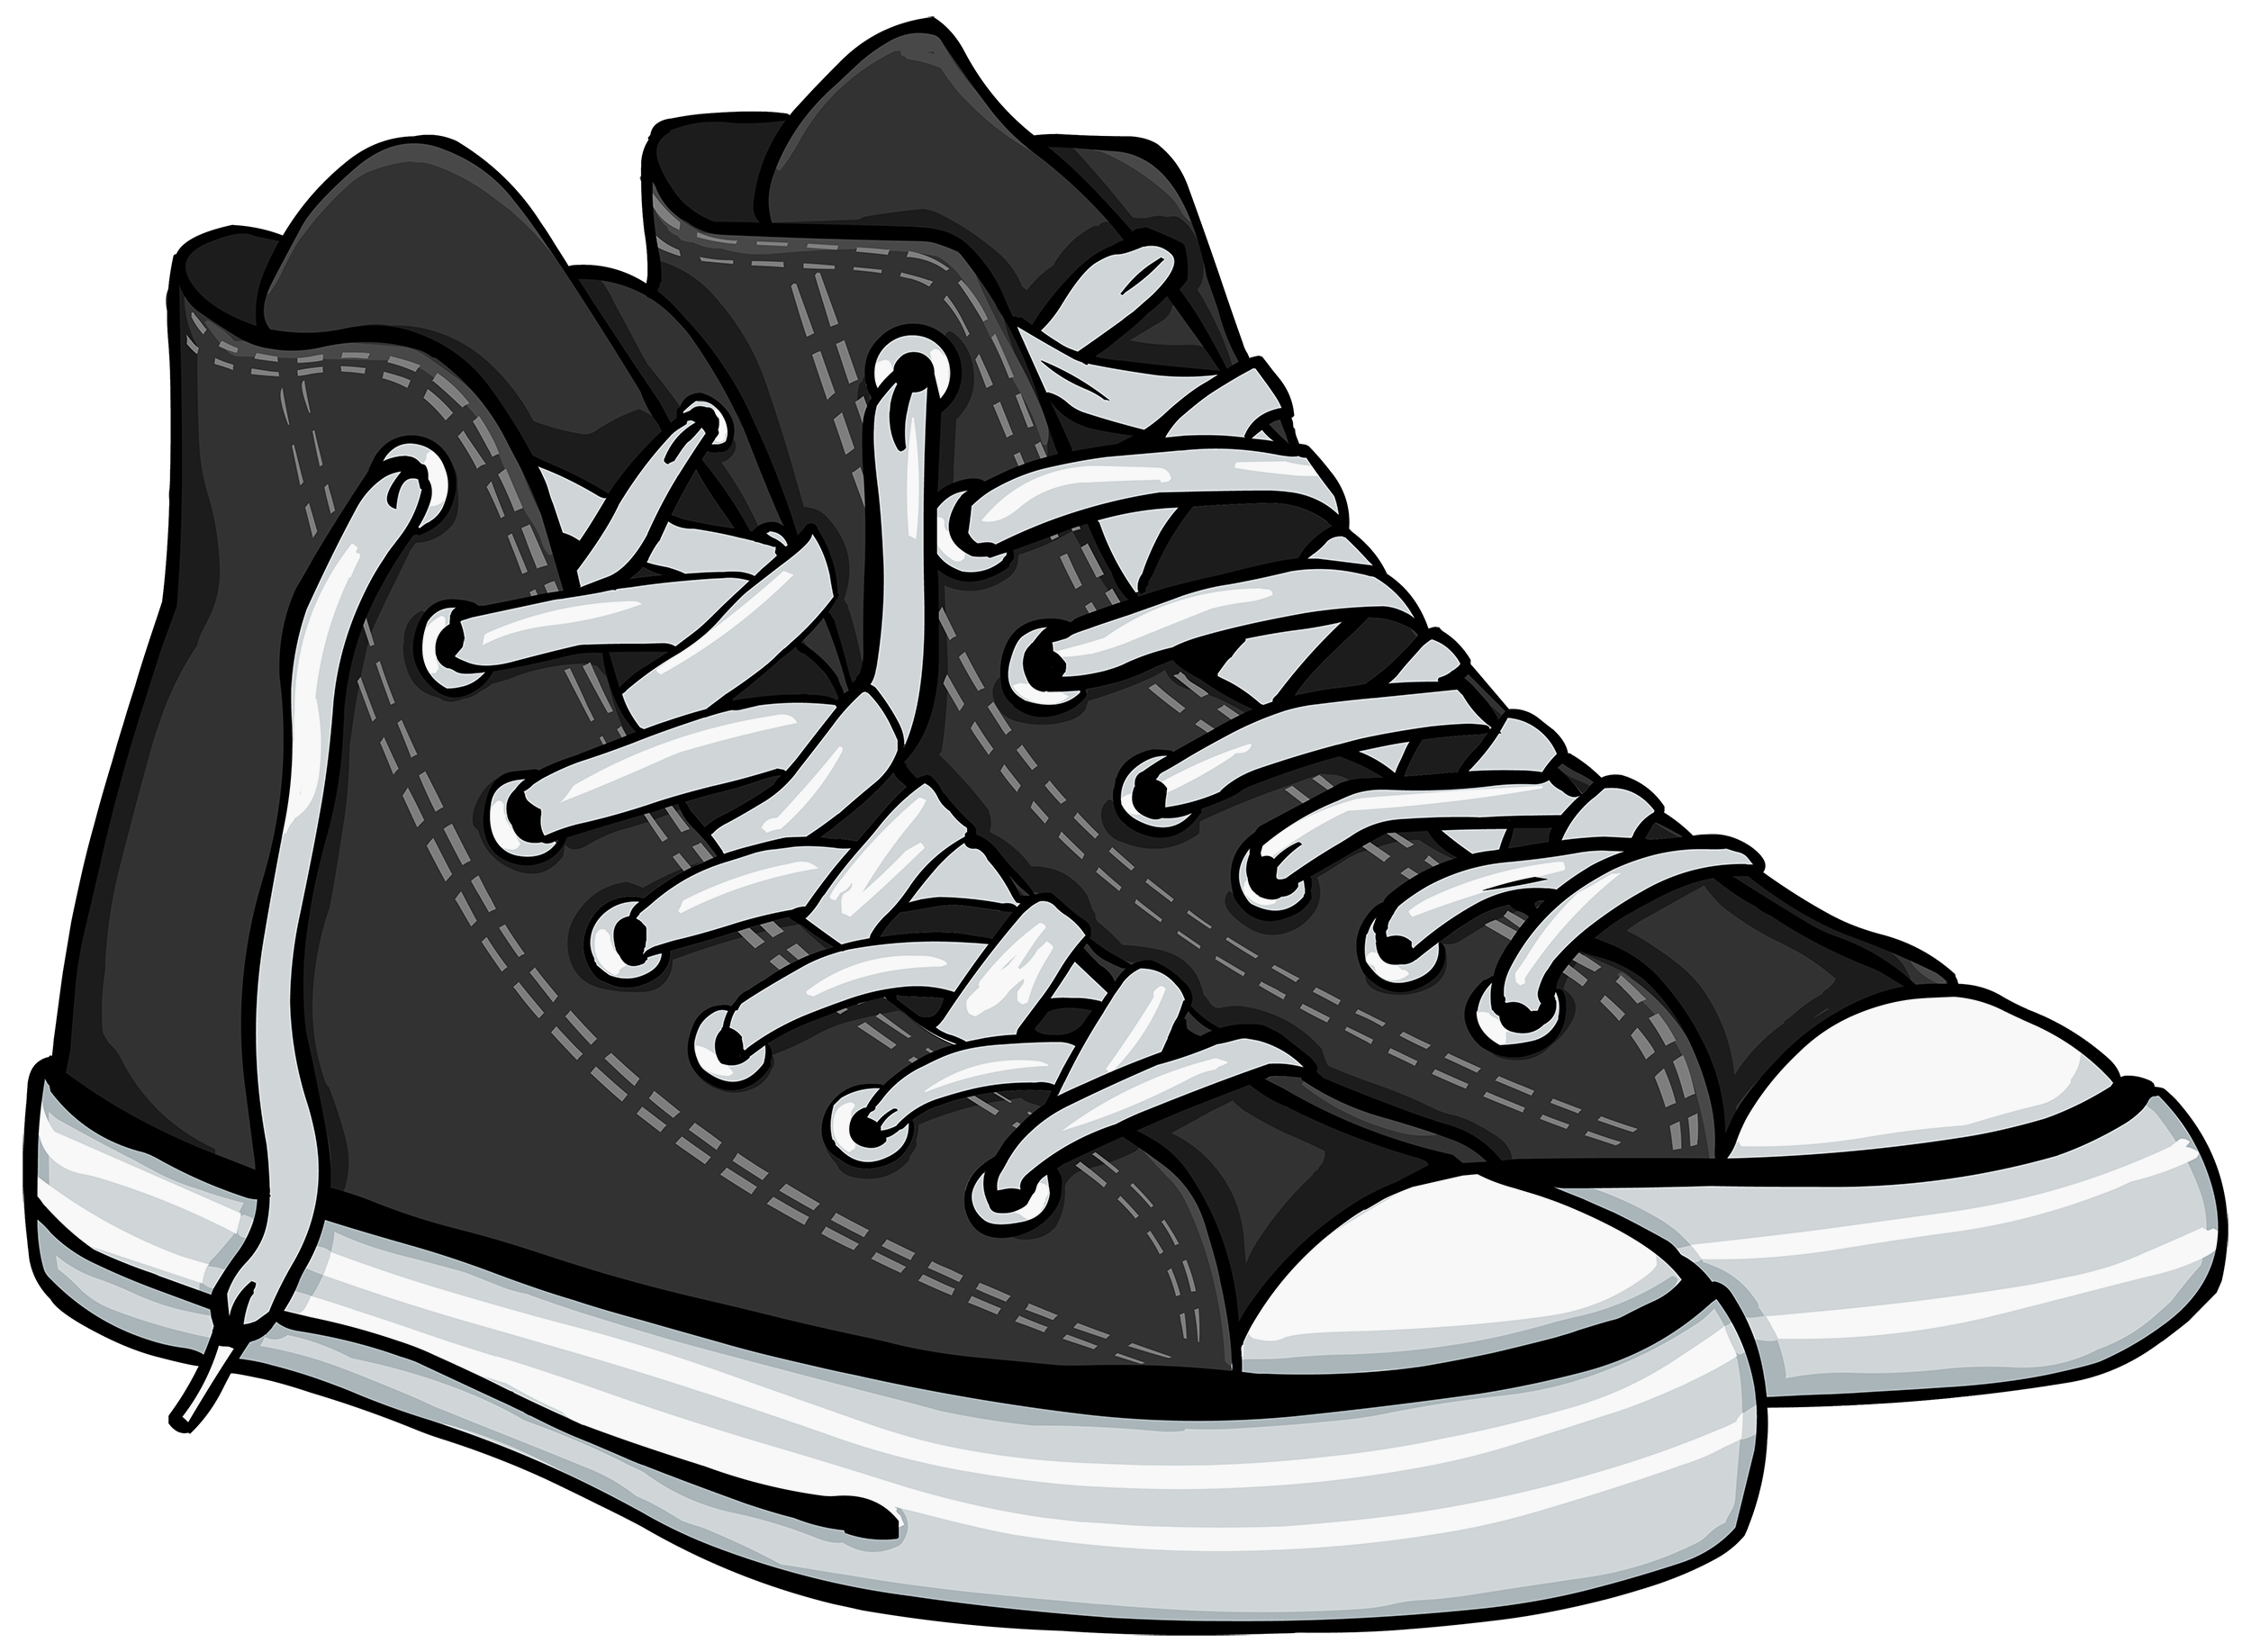 Black_High_Sneakers_PNG_Clipart 376 376